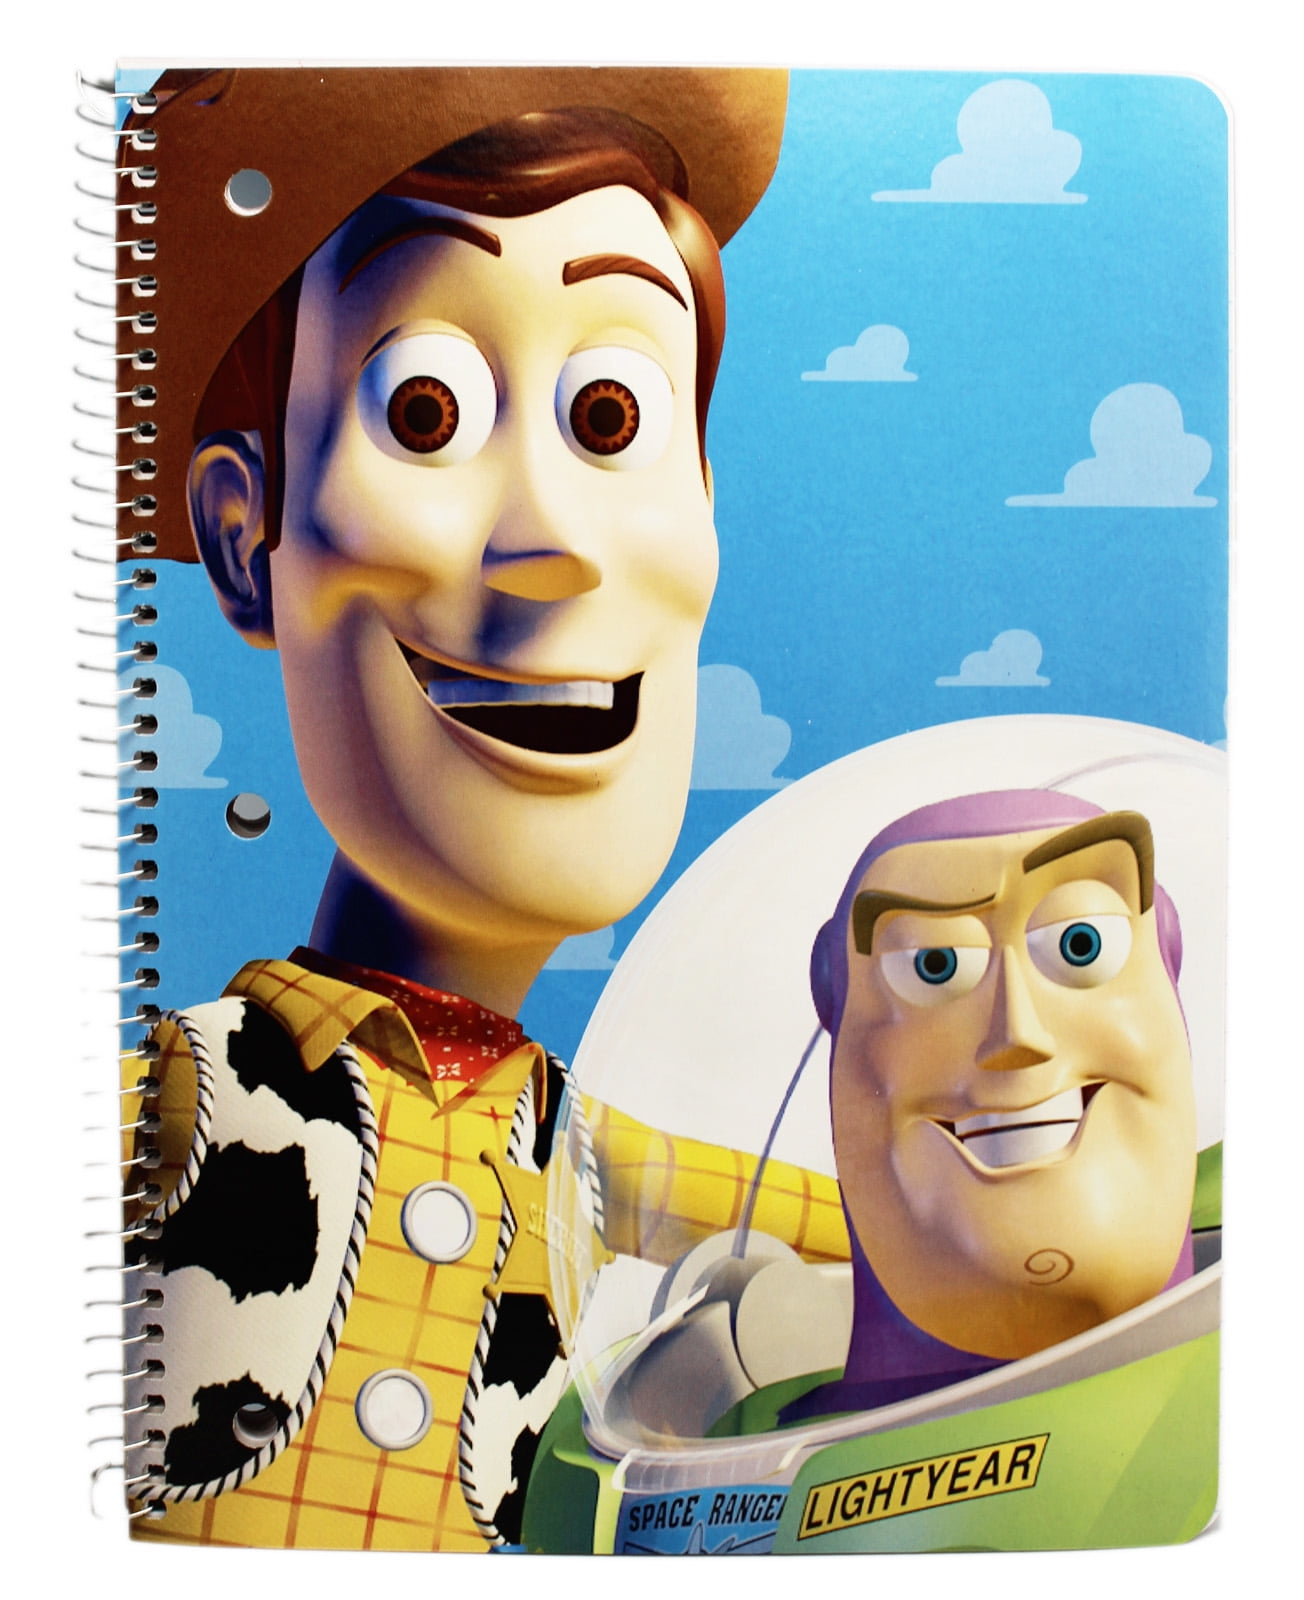 TOY STORY You've Got FRIEND A5 NOTEBOOK Ruled Note Pad WOODY Buzz Lightyear 